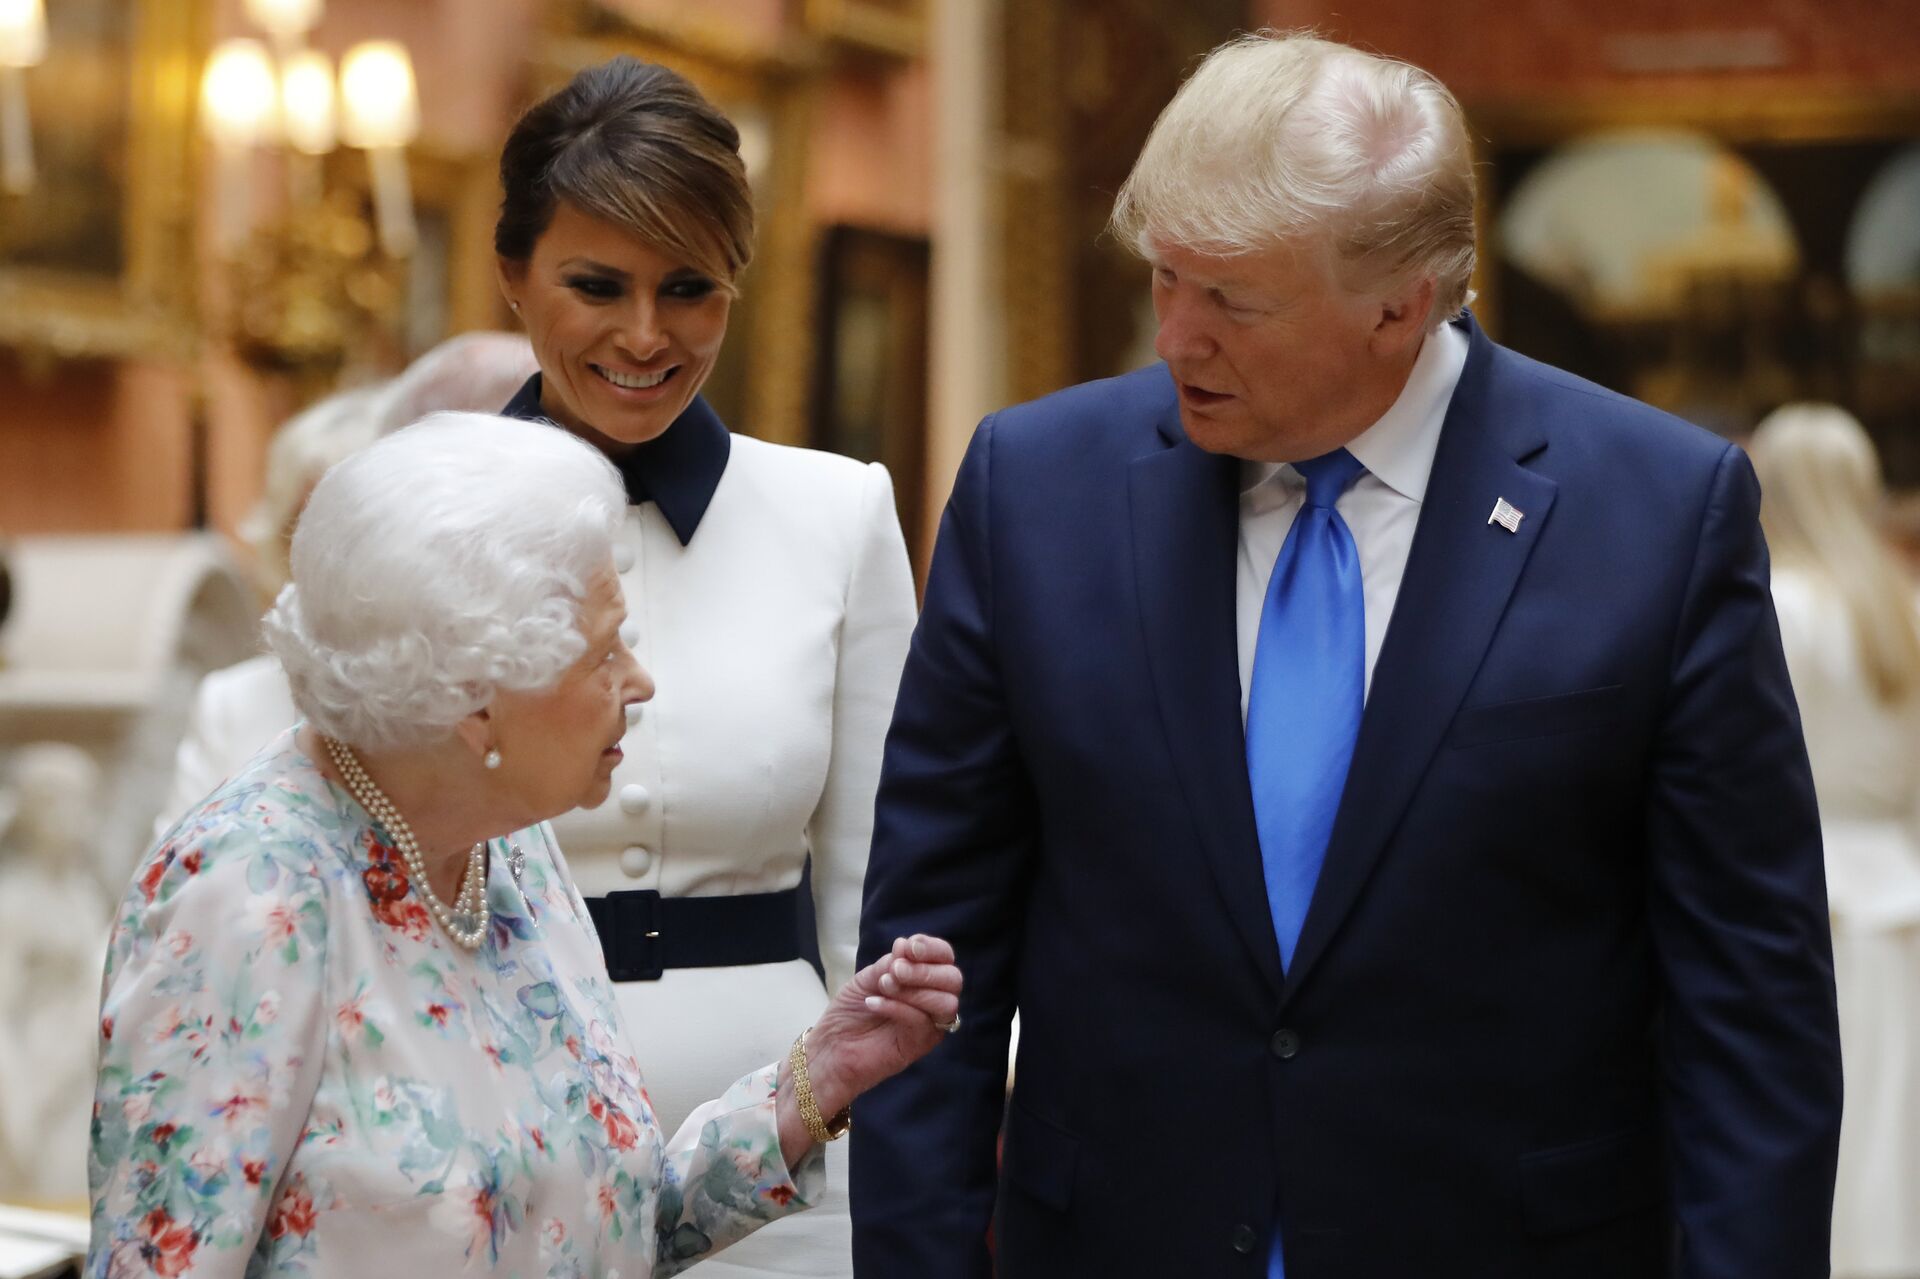 Britain's Queen Elizabeth speaks to U.S President Donald Trump and First Lady Melania Trump as they view U.S memorabilia from the Royal Collection, at Buckingham Palace, London, Monday, June 3, 2019 - Sputnik International, 1920, 01.12.2021